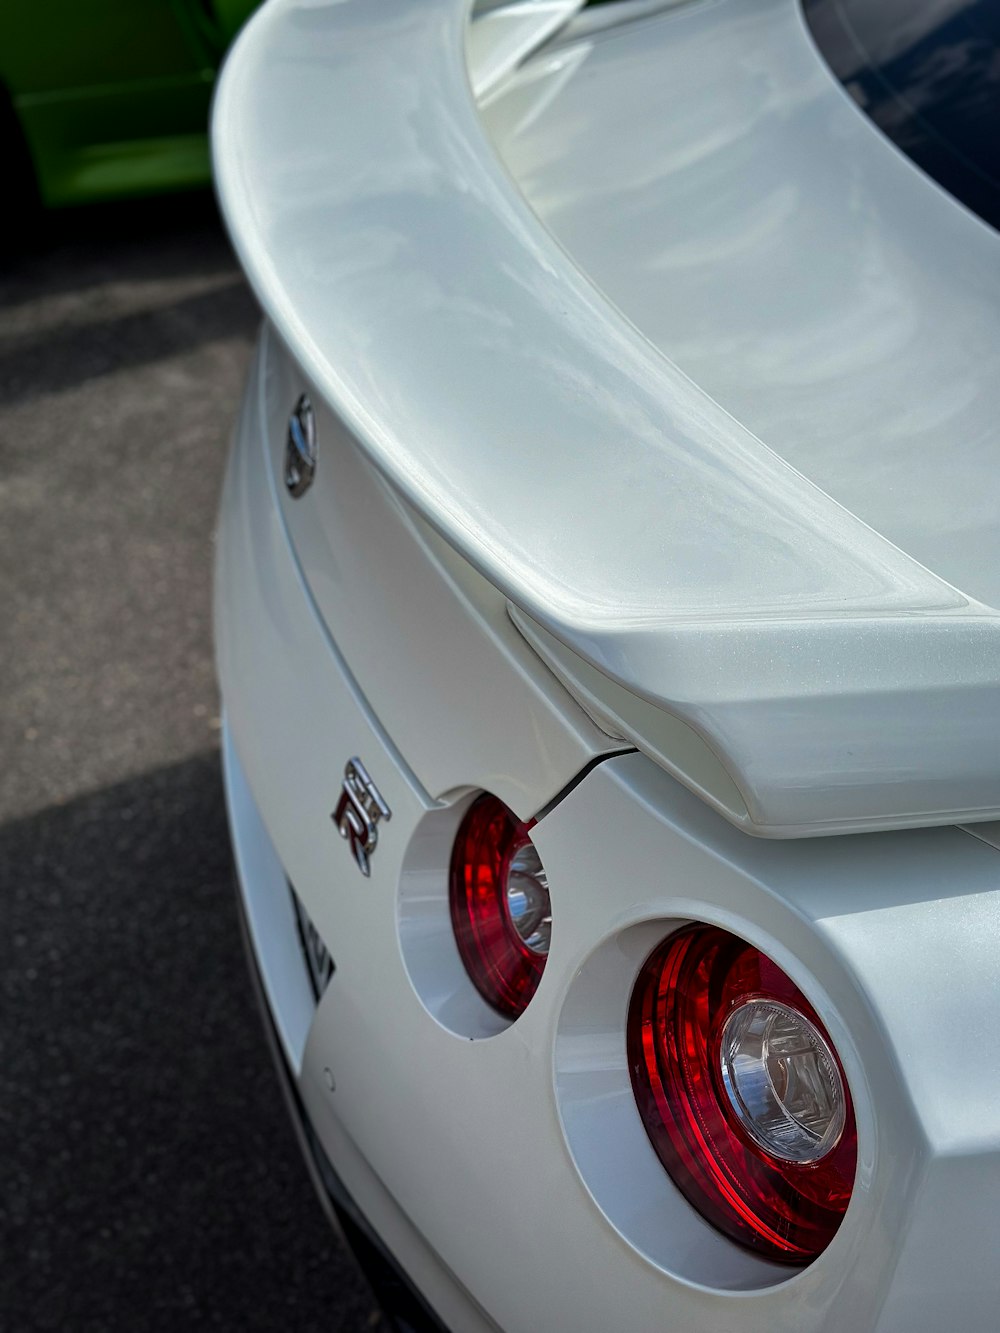 the tail lights of a white sports car